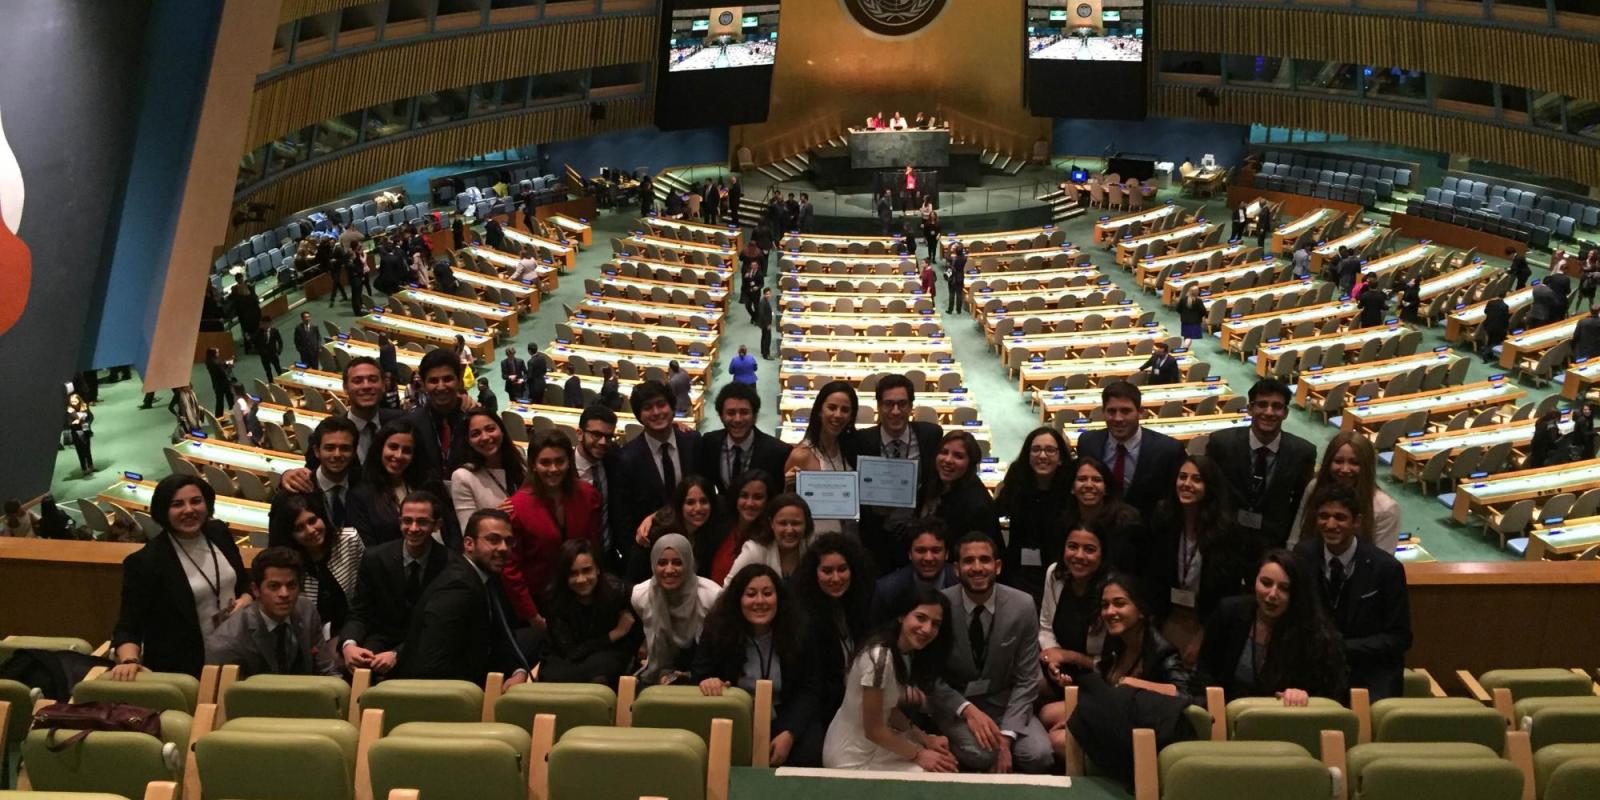 AUC's Model UN delegation visited the United Nations General Assembly